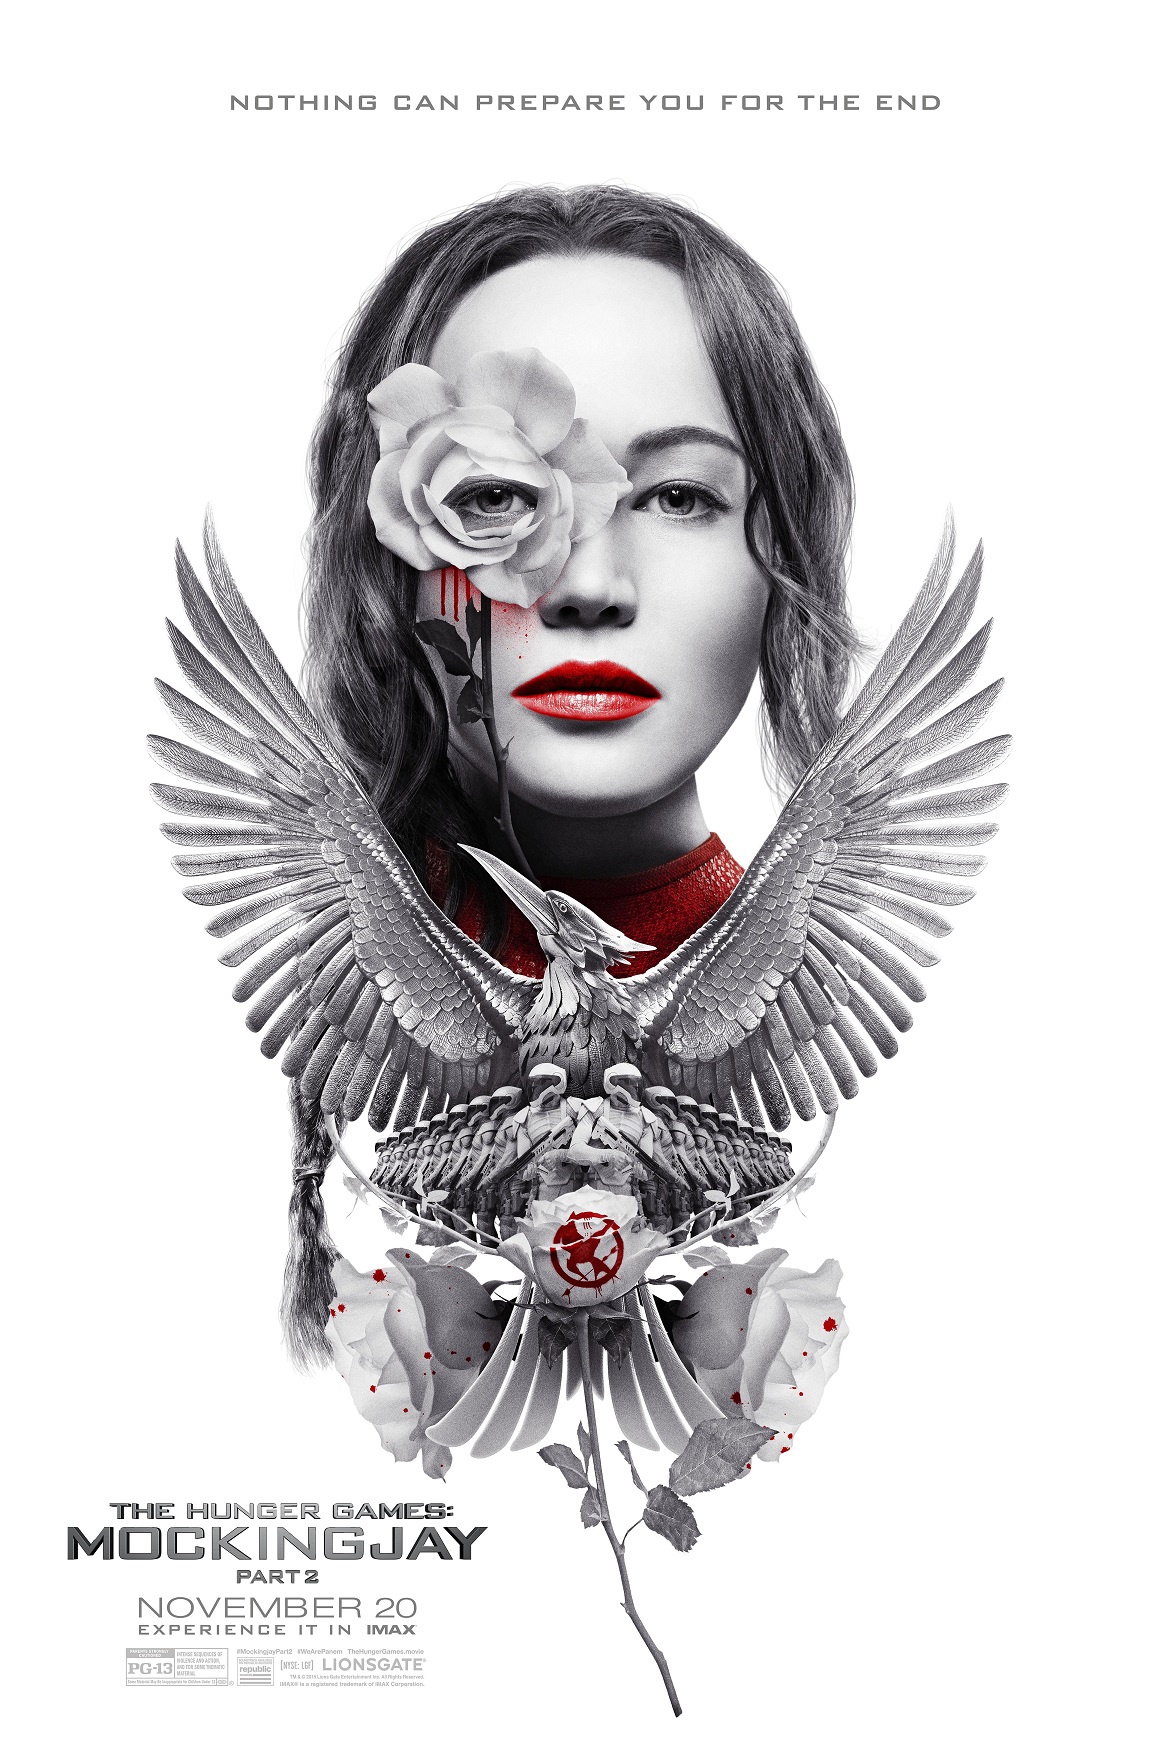 The Hunger Games IMAX poster